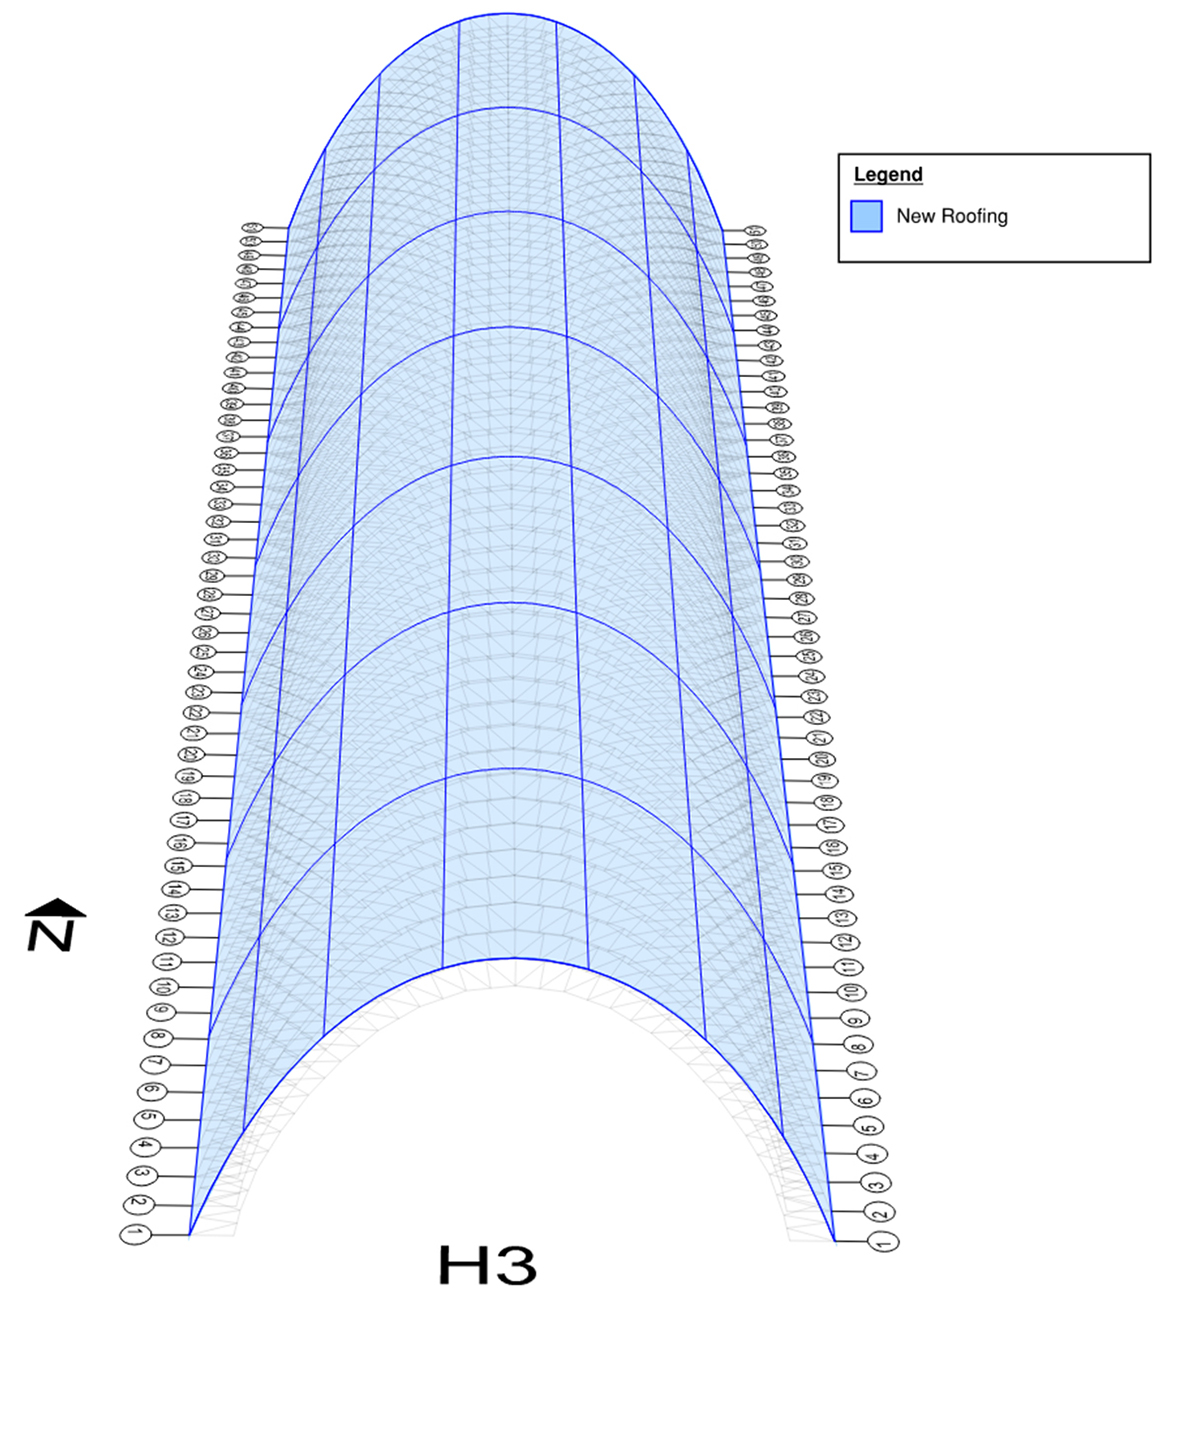 A 3D drawing of the entire length of Hangar 3 looking down on its parabolic arch trusses which are clad in a curved blue surface indicating the new roof.